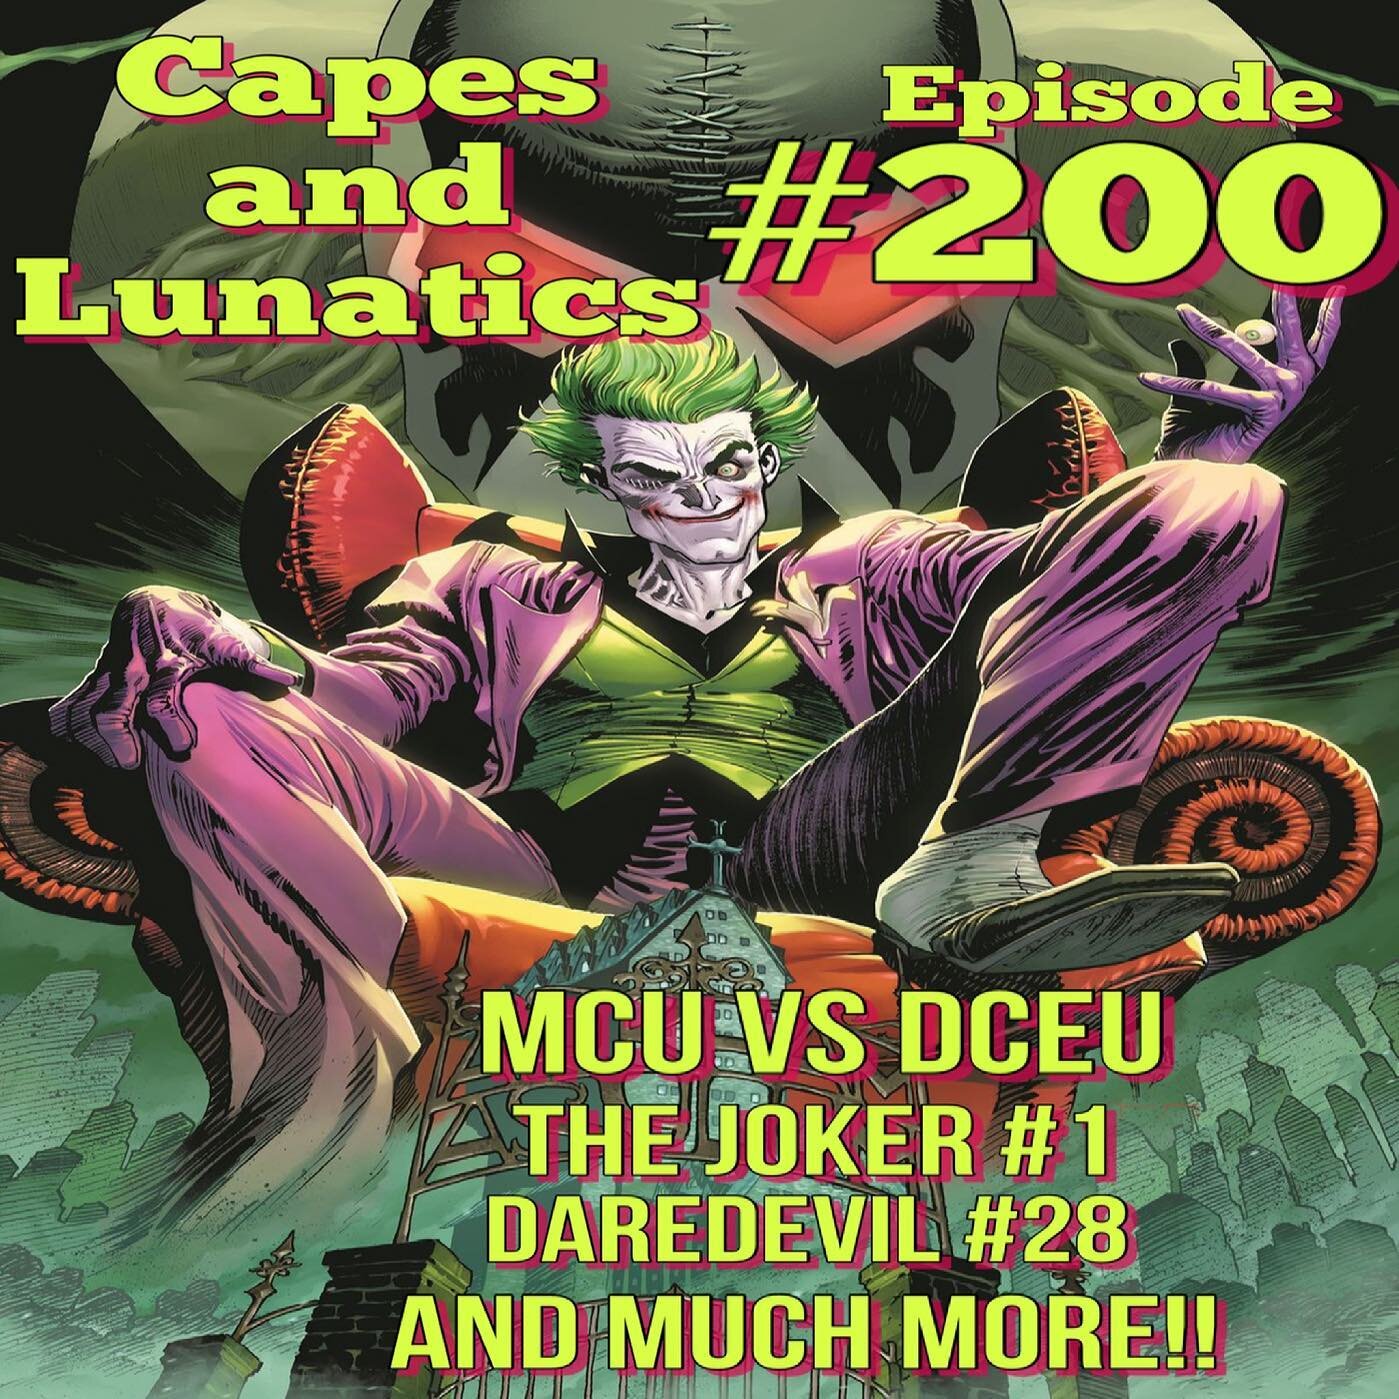 Capes and Lunatics #podcast episode #200! Your geek guides @nightwingpdp @superconnectivity and @lilithhellfire86 with special guest @robsouthgate discuss #justiceleaguesnydercut #marvelcinematicuniverse vs #dcextendeduniverse and new comics includin